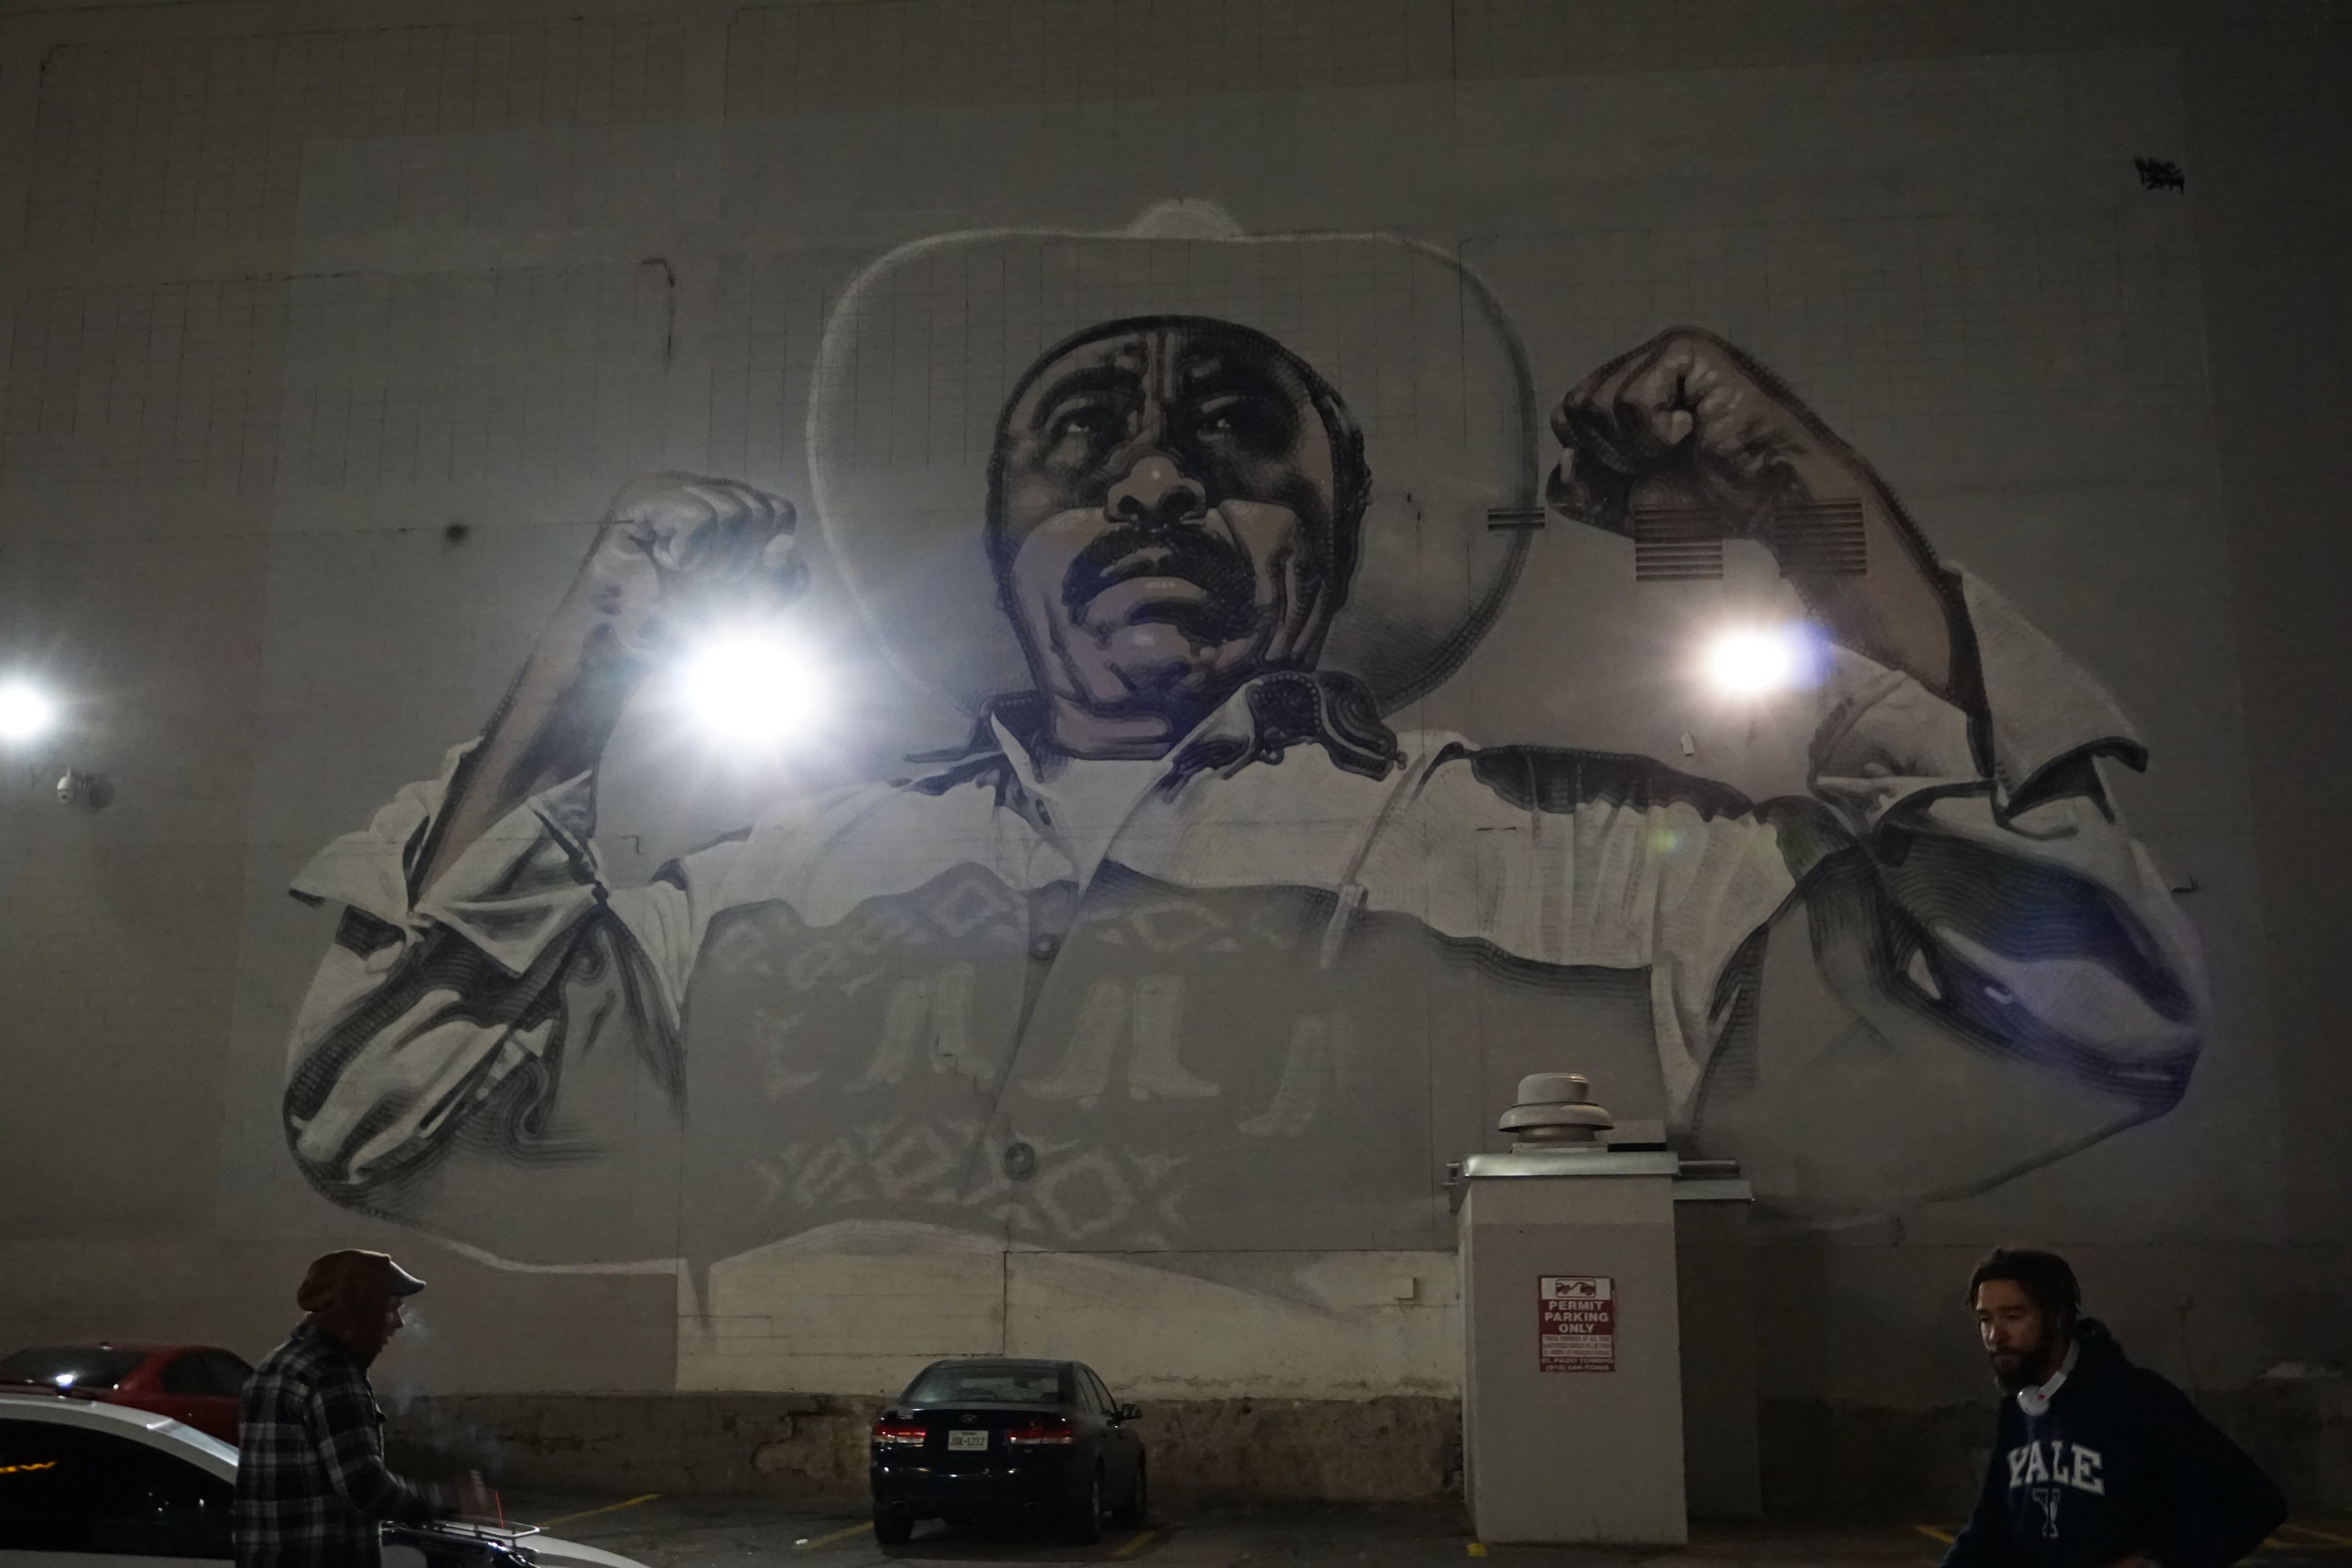 Street art mural of a Mexican man with his arms up and hands in fists